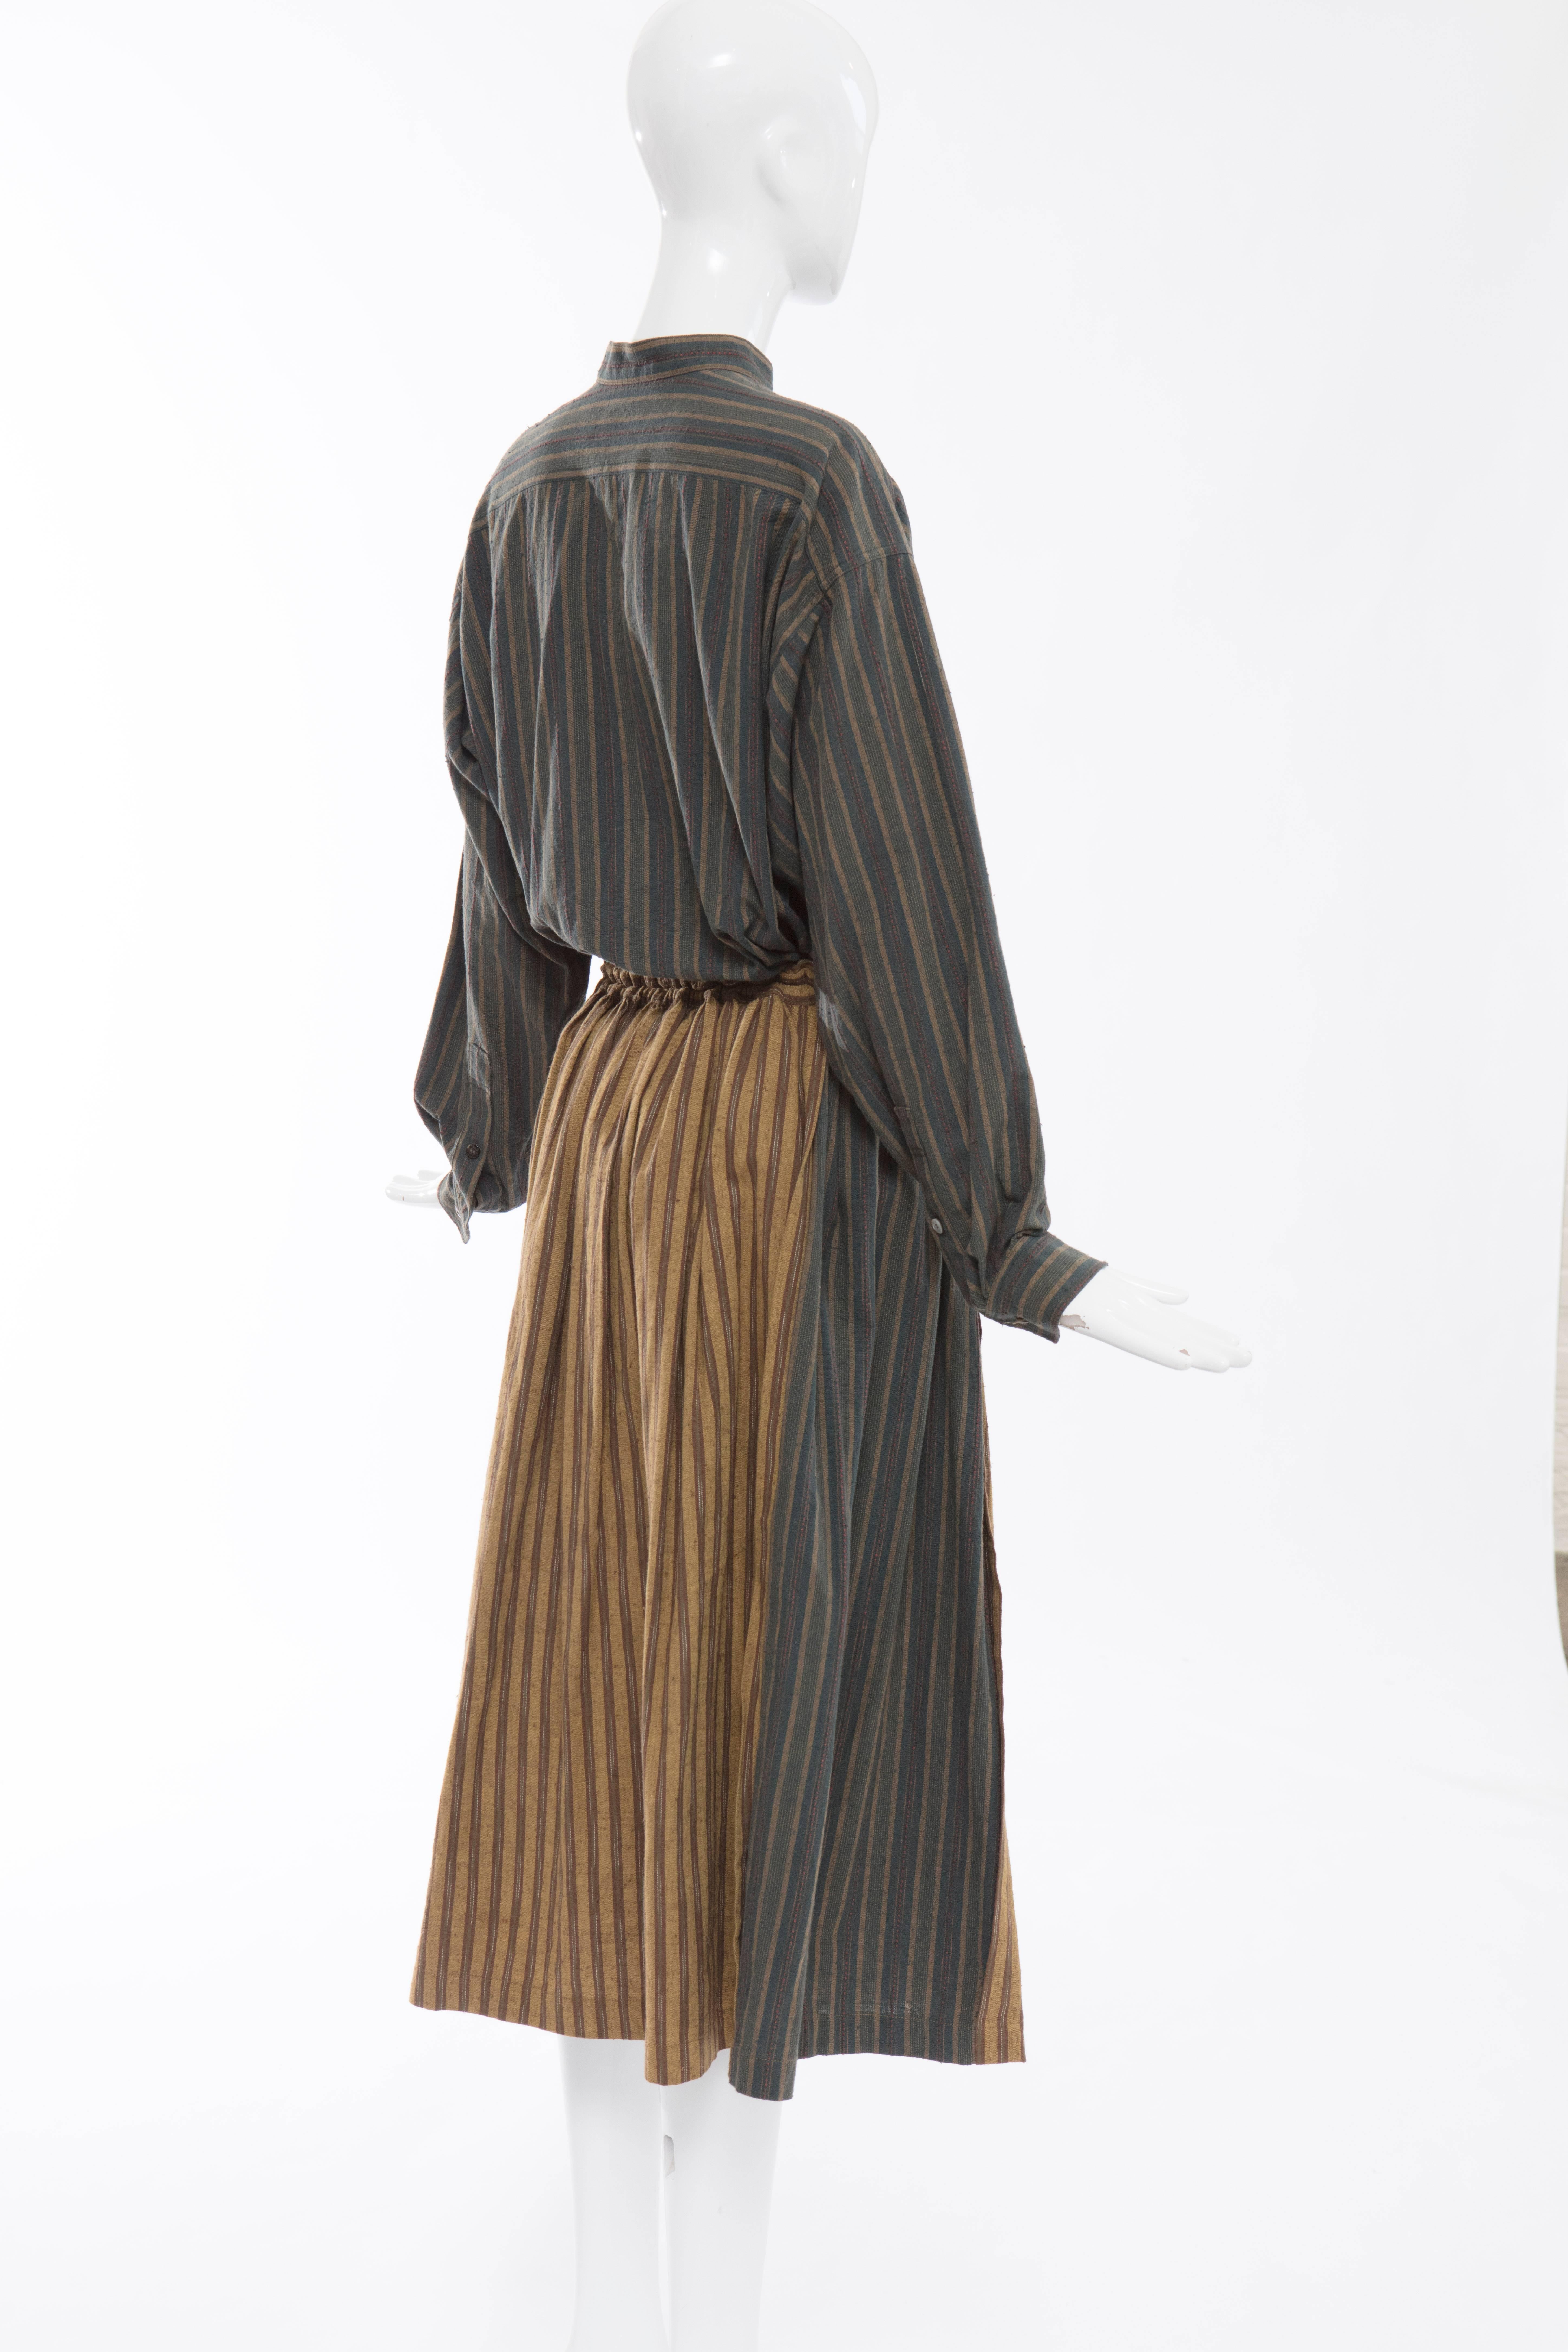 Brown Issey Miyake Plantation Striped Woven Cotton Skirt Suit, Circa 1980's